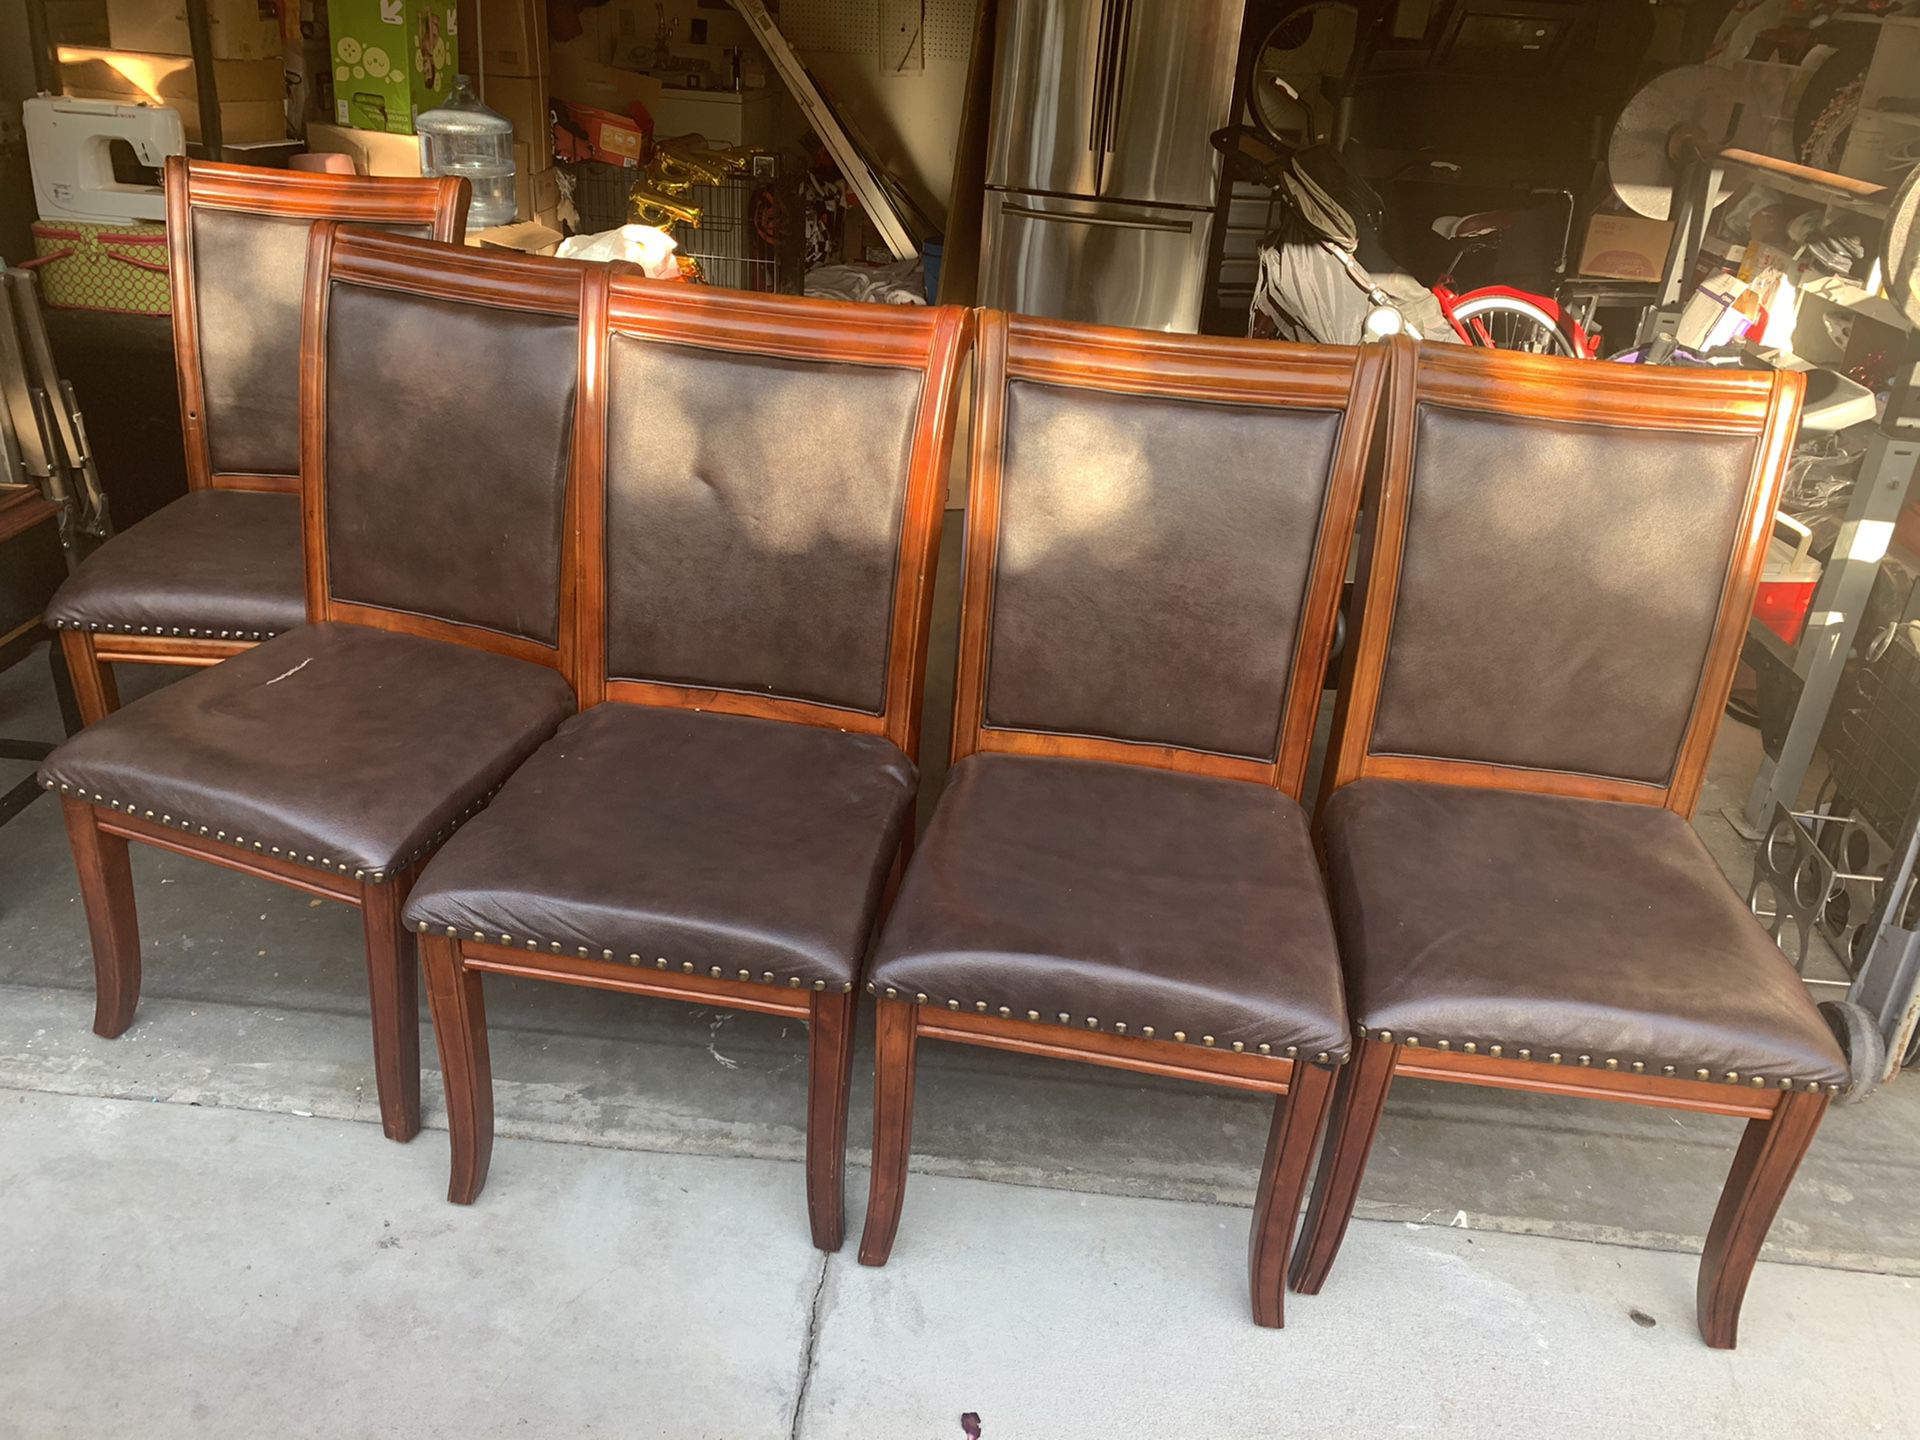 5- Kitchen Table Chairs all for $32